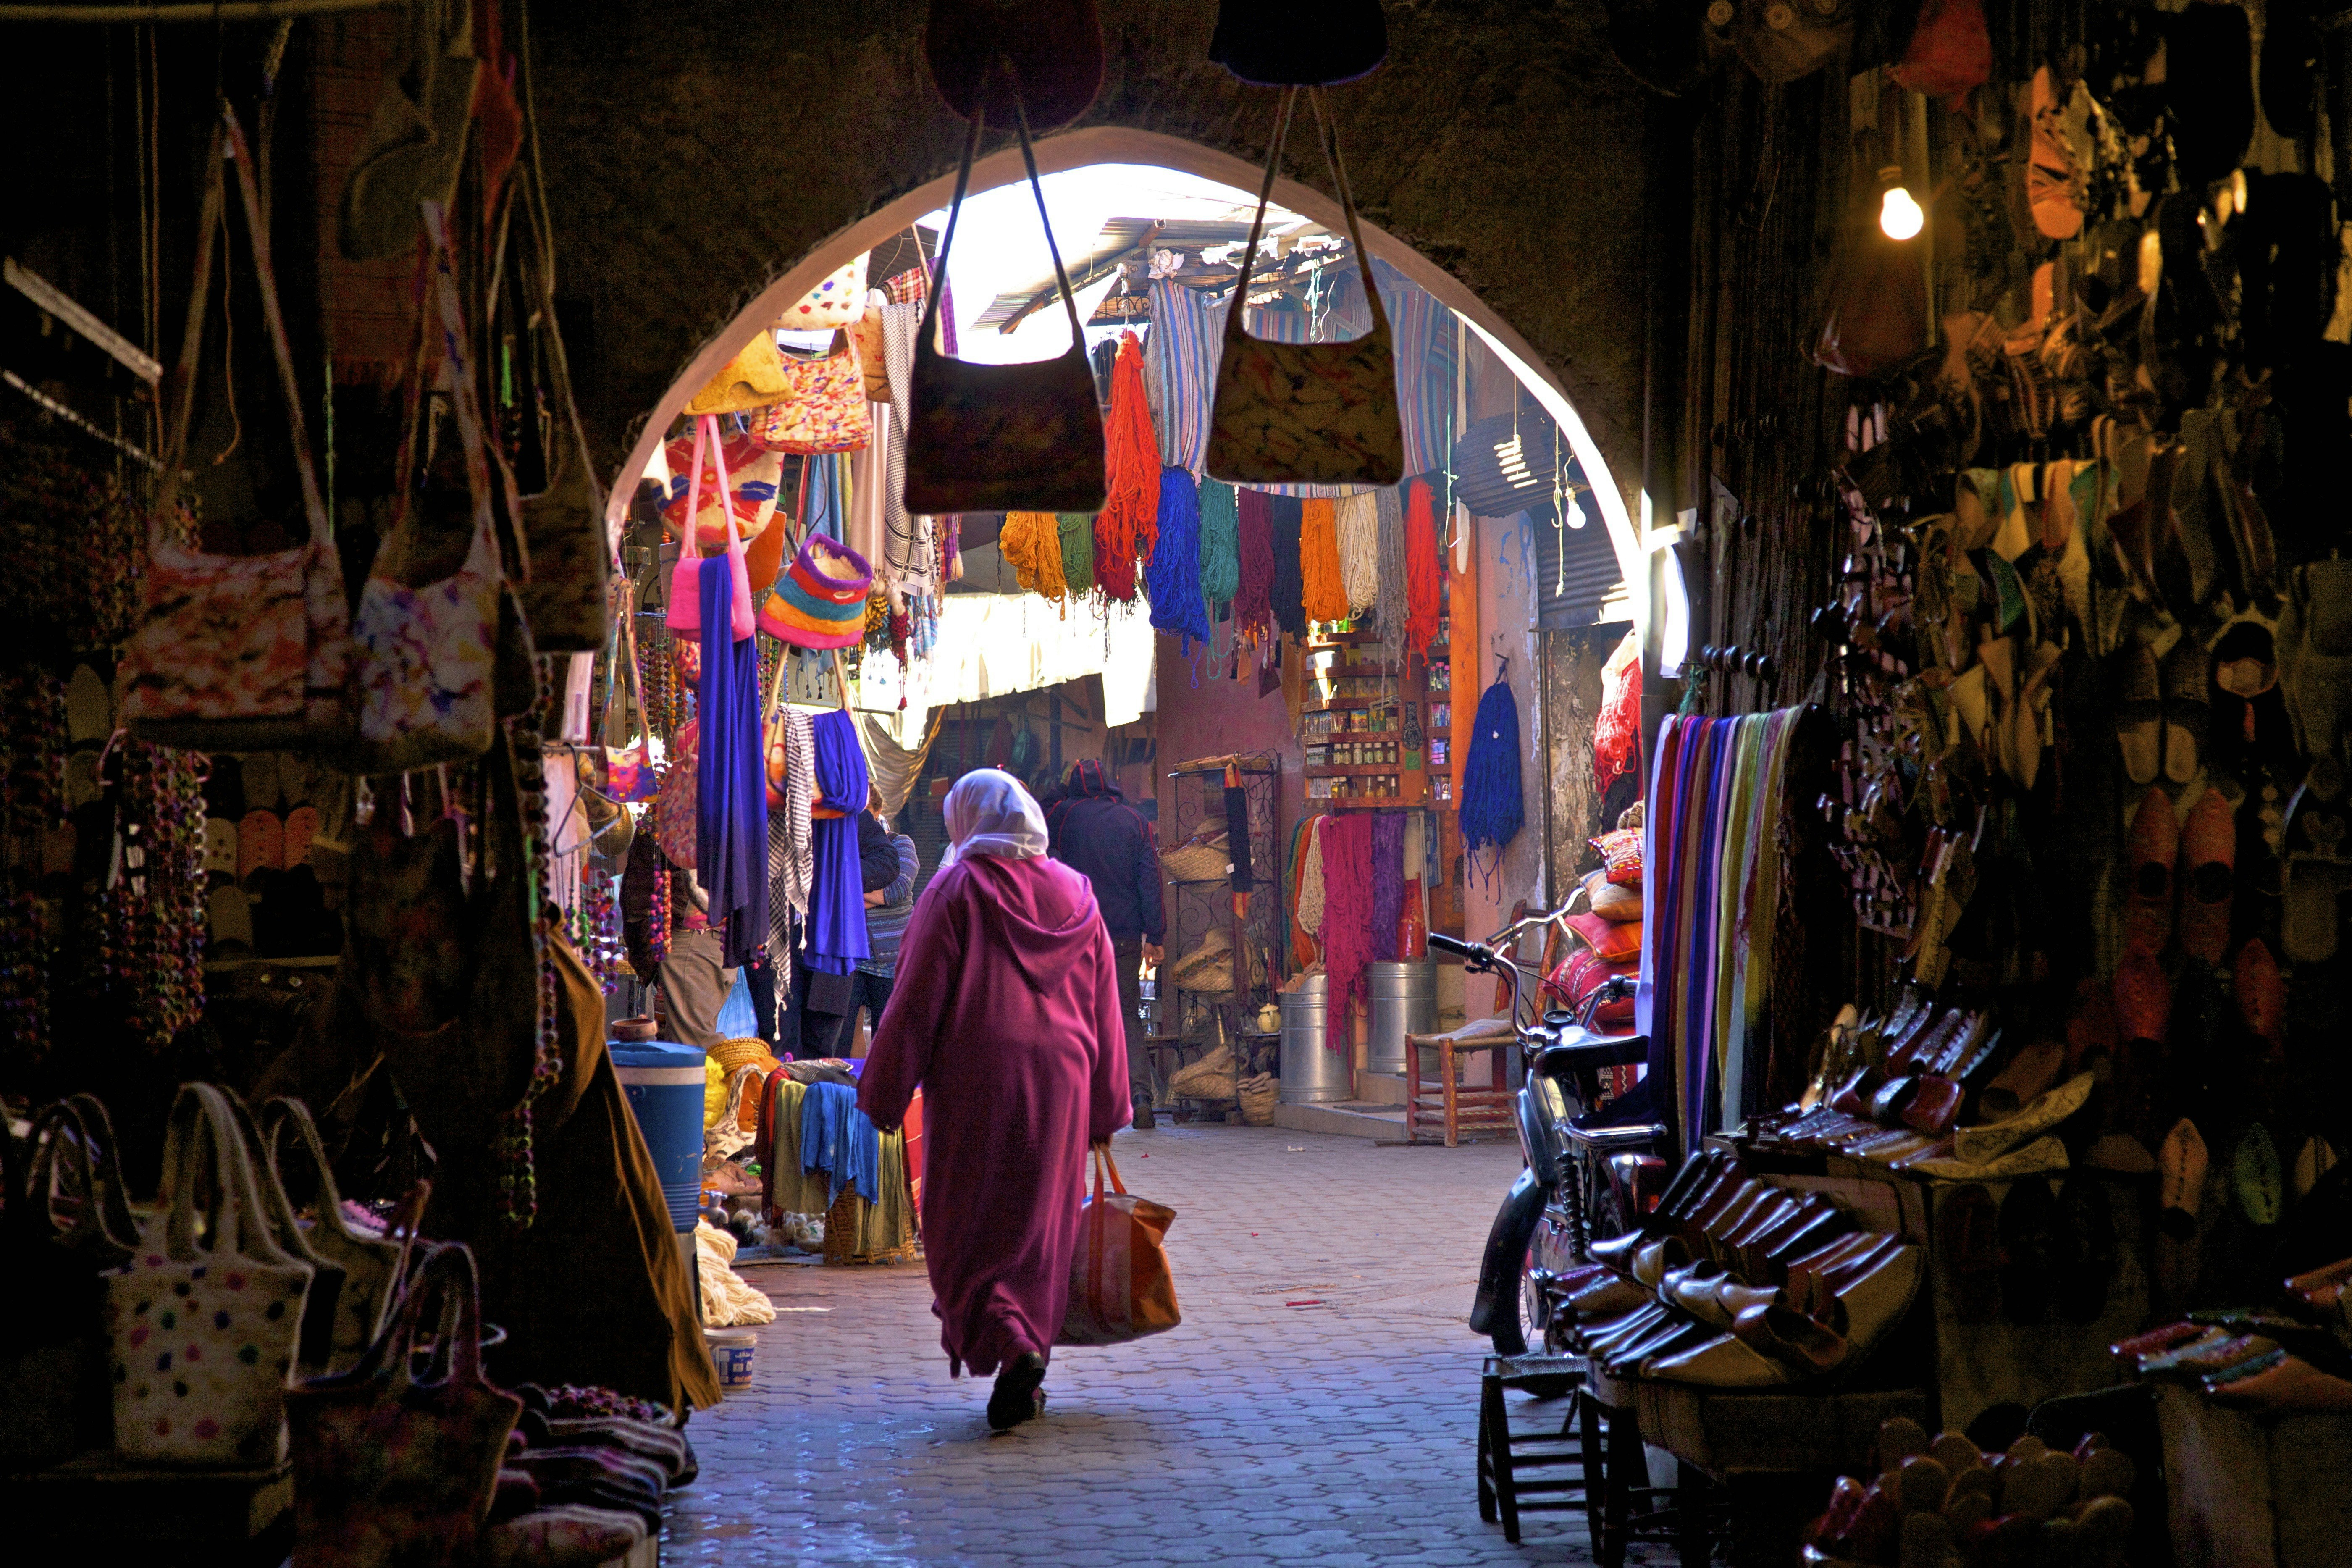 A woman in a pink dress and white hijab walks through one of the iconic archways of Morocco in a colorful souk in Marrakech 